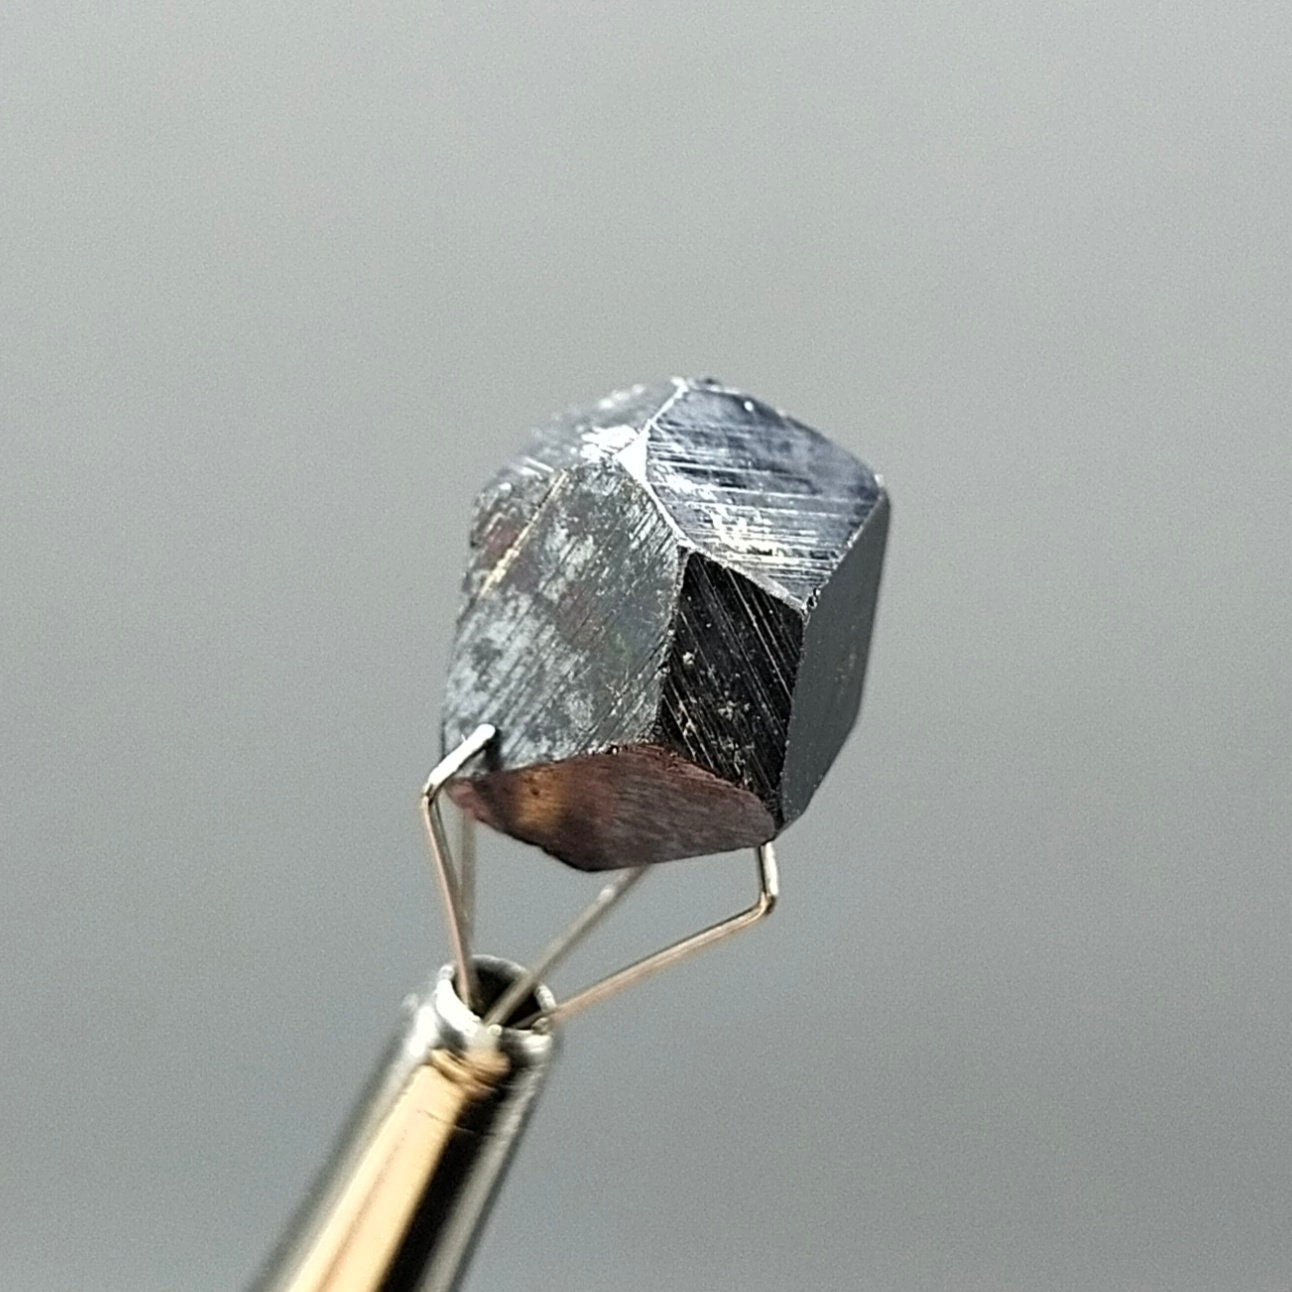 ARSAA GEMS AND MINERALSBlack Magnetite crystal with octahedral structure and patterns on surface from Skardu Gilgit Baltistan Pakistan, 4.8 grams - Premium  from ARSAA GEMS AND MINERALS - Just $30.00! Shop now at ARSAA GEMS AND MINERALS